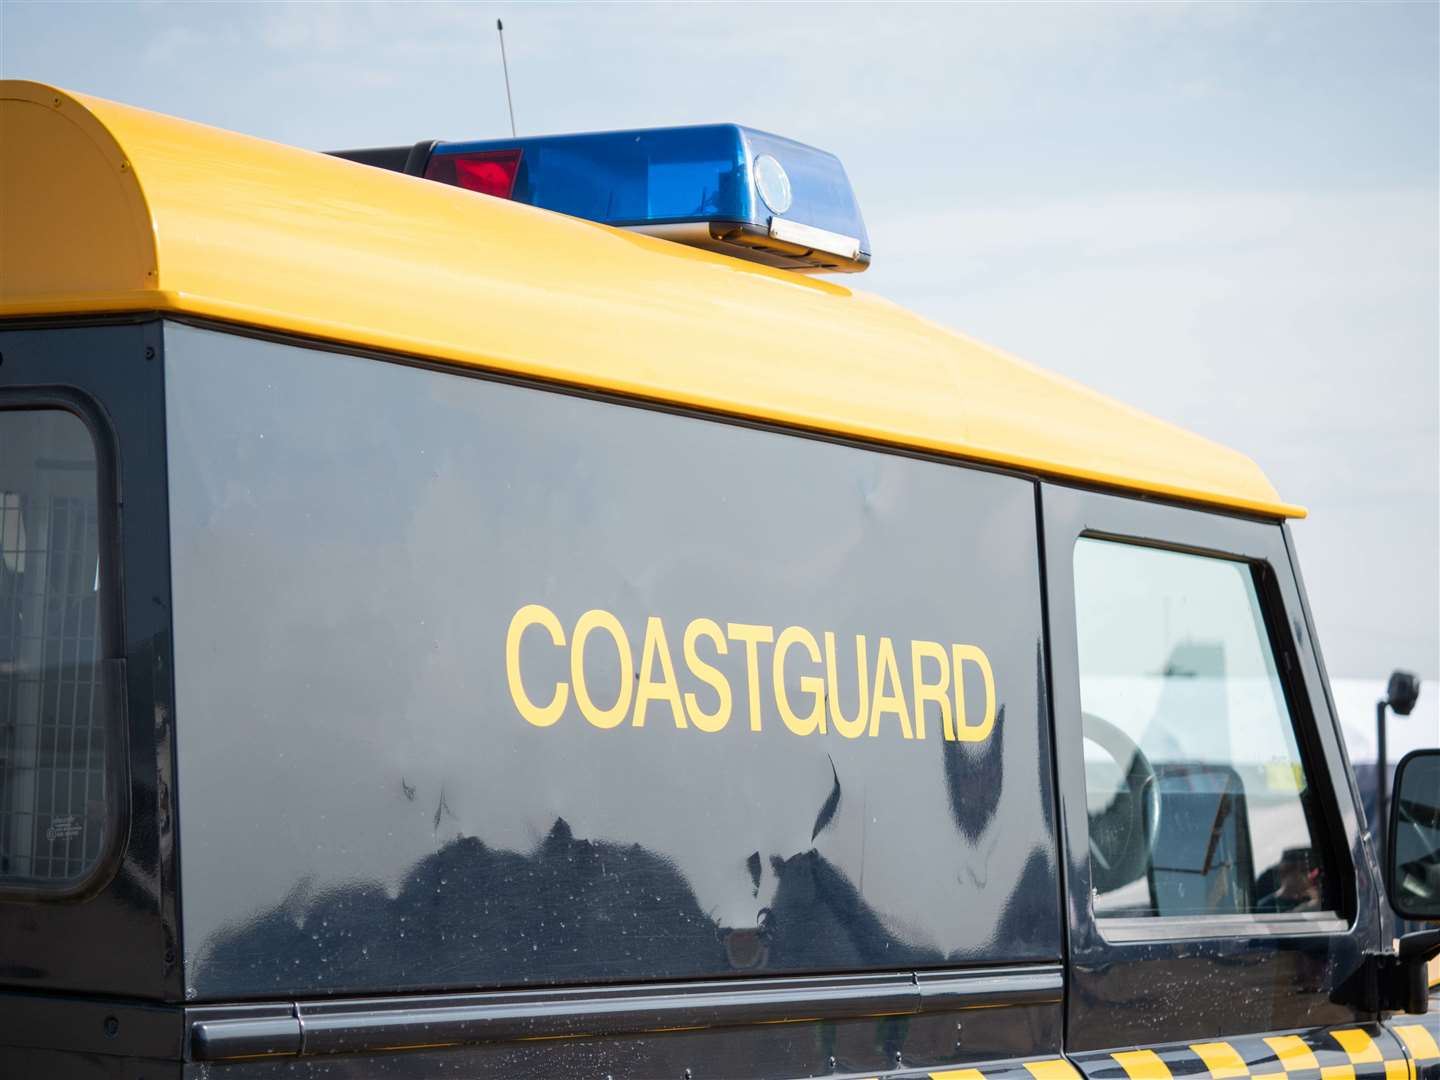 The Coastguard are urging people to be aware of the dangers that can lurk around the coastline.